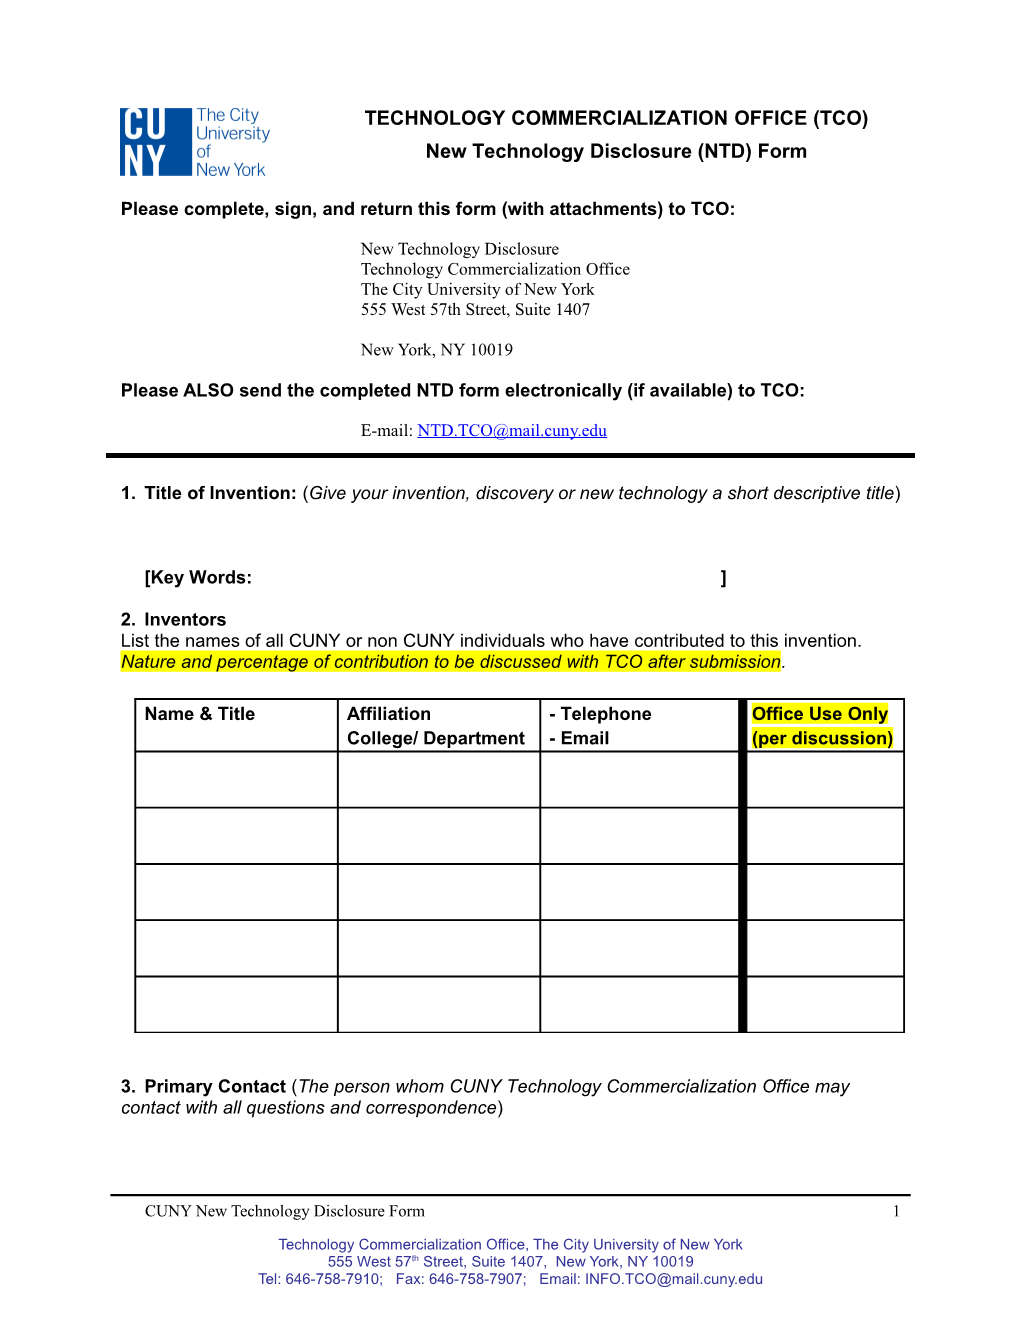 Please Complete, Sign, and Return This Form (With Attachments) to TCO